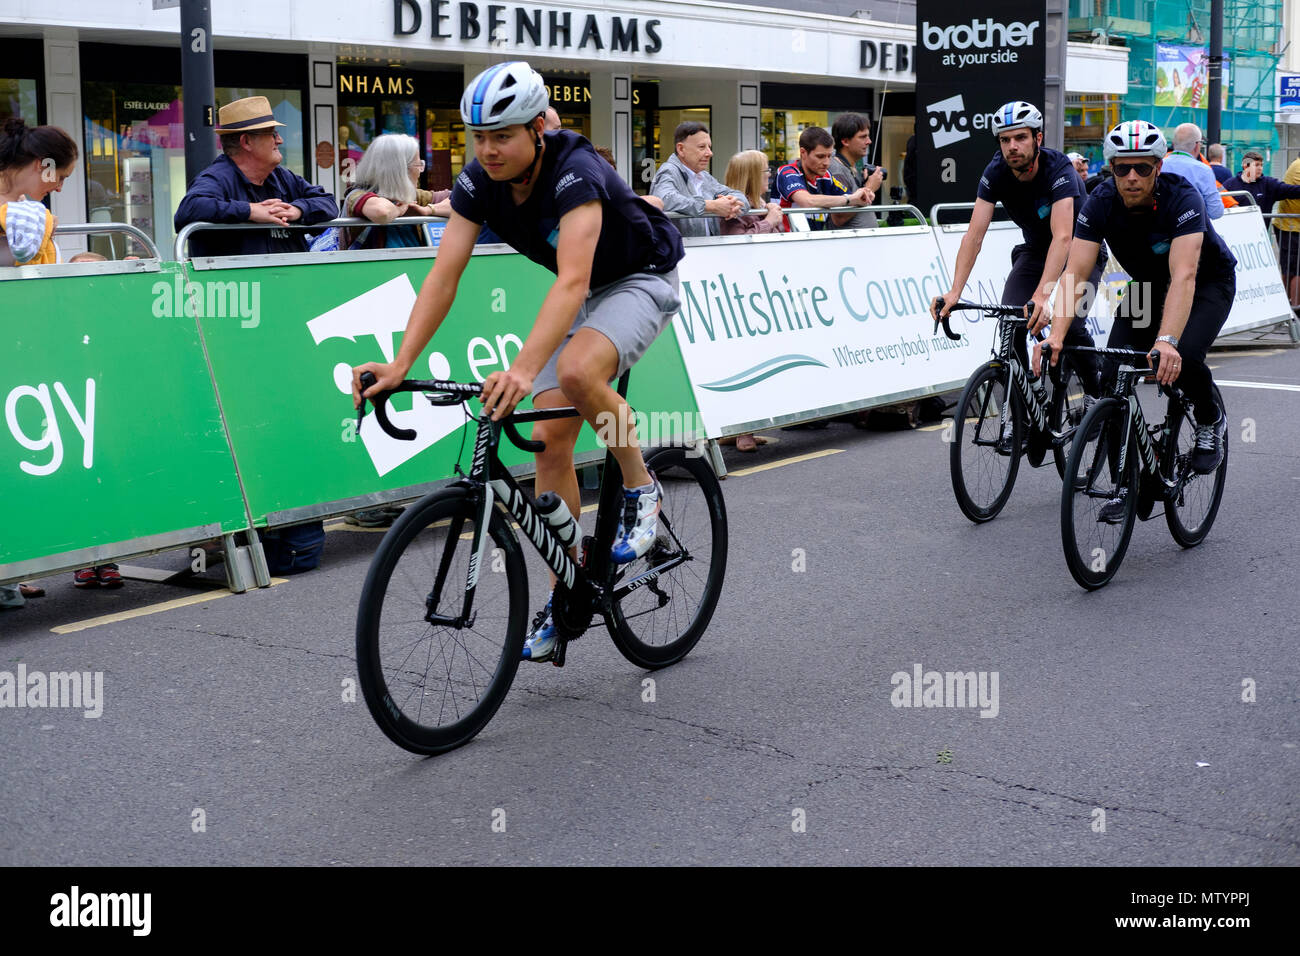 Salisbury, UK. 31st May 2018 Salisbury. Part of the recovery programme for Salisbury after recently nerve agent attack, the city hosted the finals of the elite OVO Energy Tour Series. Wiltshire Council and Salisbury City Council supported the race, which took place in Wiltshire for the first time as part of the Salisbury recovery programme. The prestigious tour reach its exciting climax, when the men's and women's teams race for victory after competing in eight previous rounds in different cities. Credit: © pcp/ Alamy Stock Photo (Default)/Alamy Live News Stock Photo